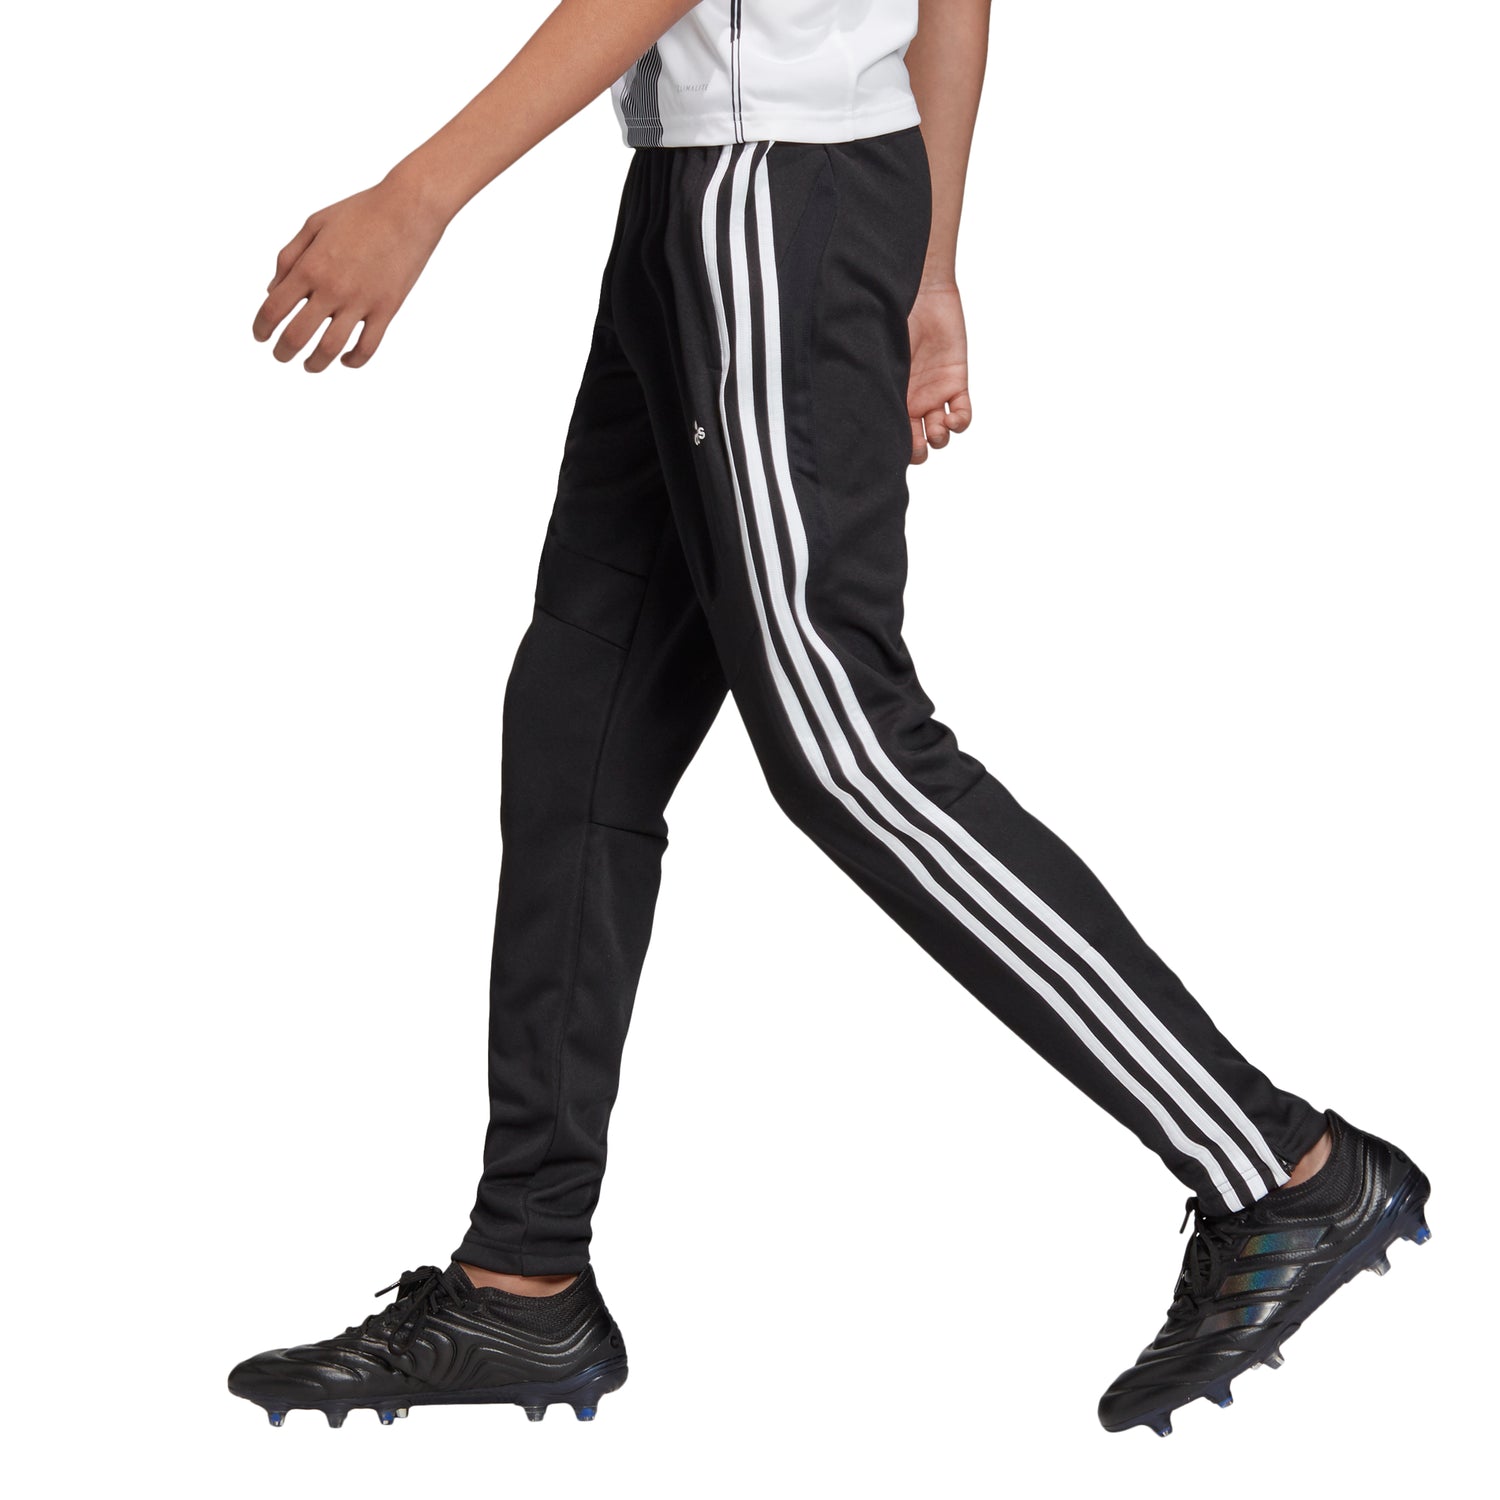 Adidas Men's Regular Fit Pants (Black_S) : Amazon.in: Clothing & Accessories